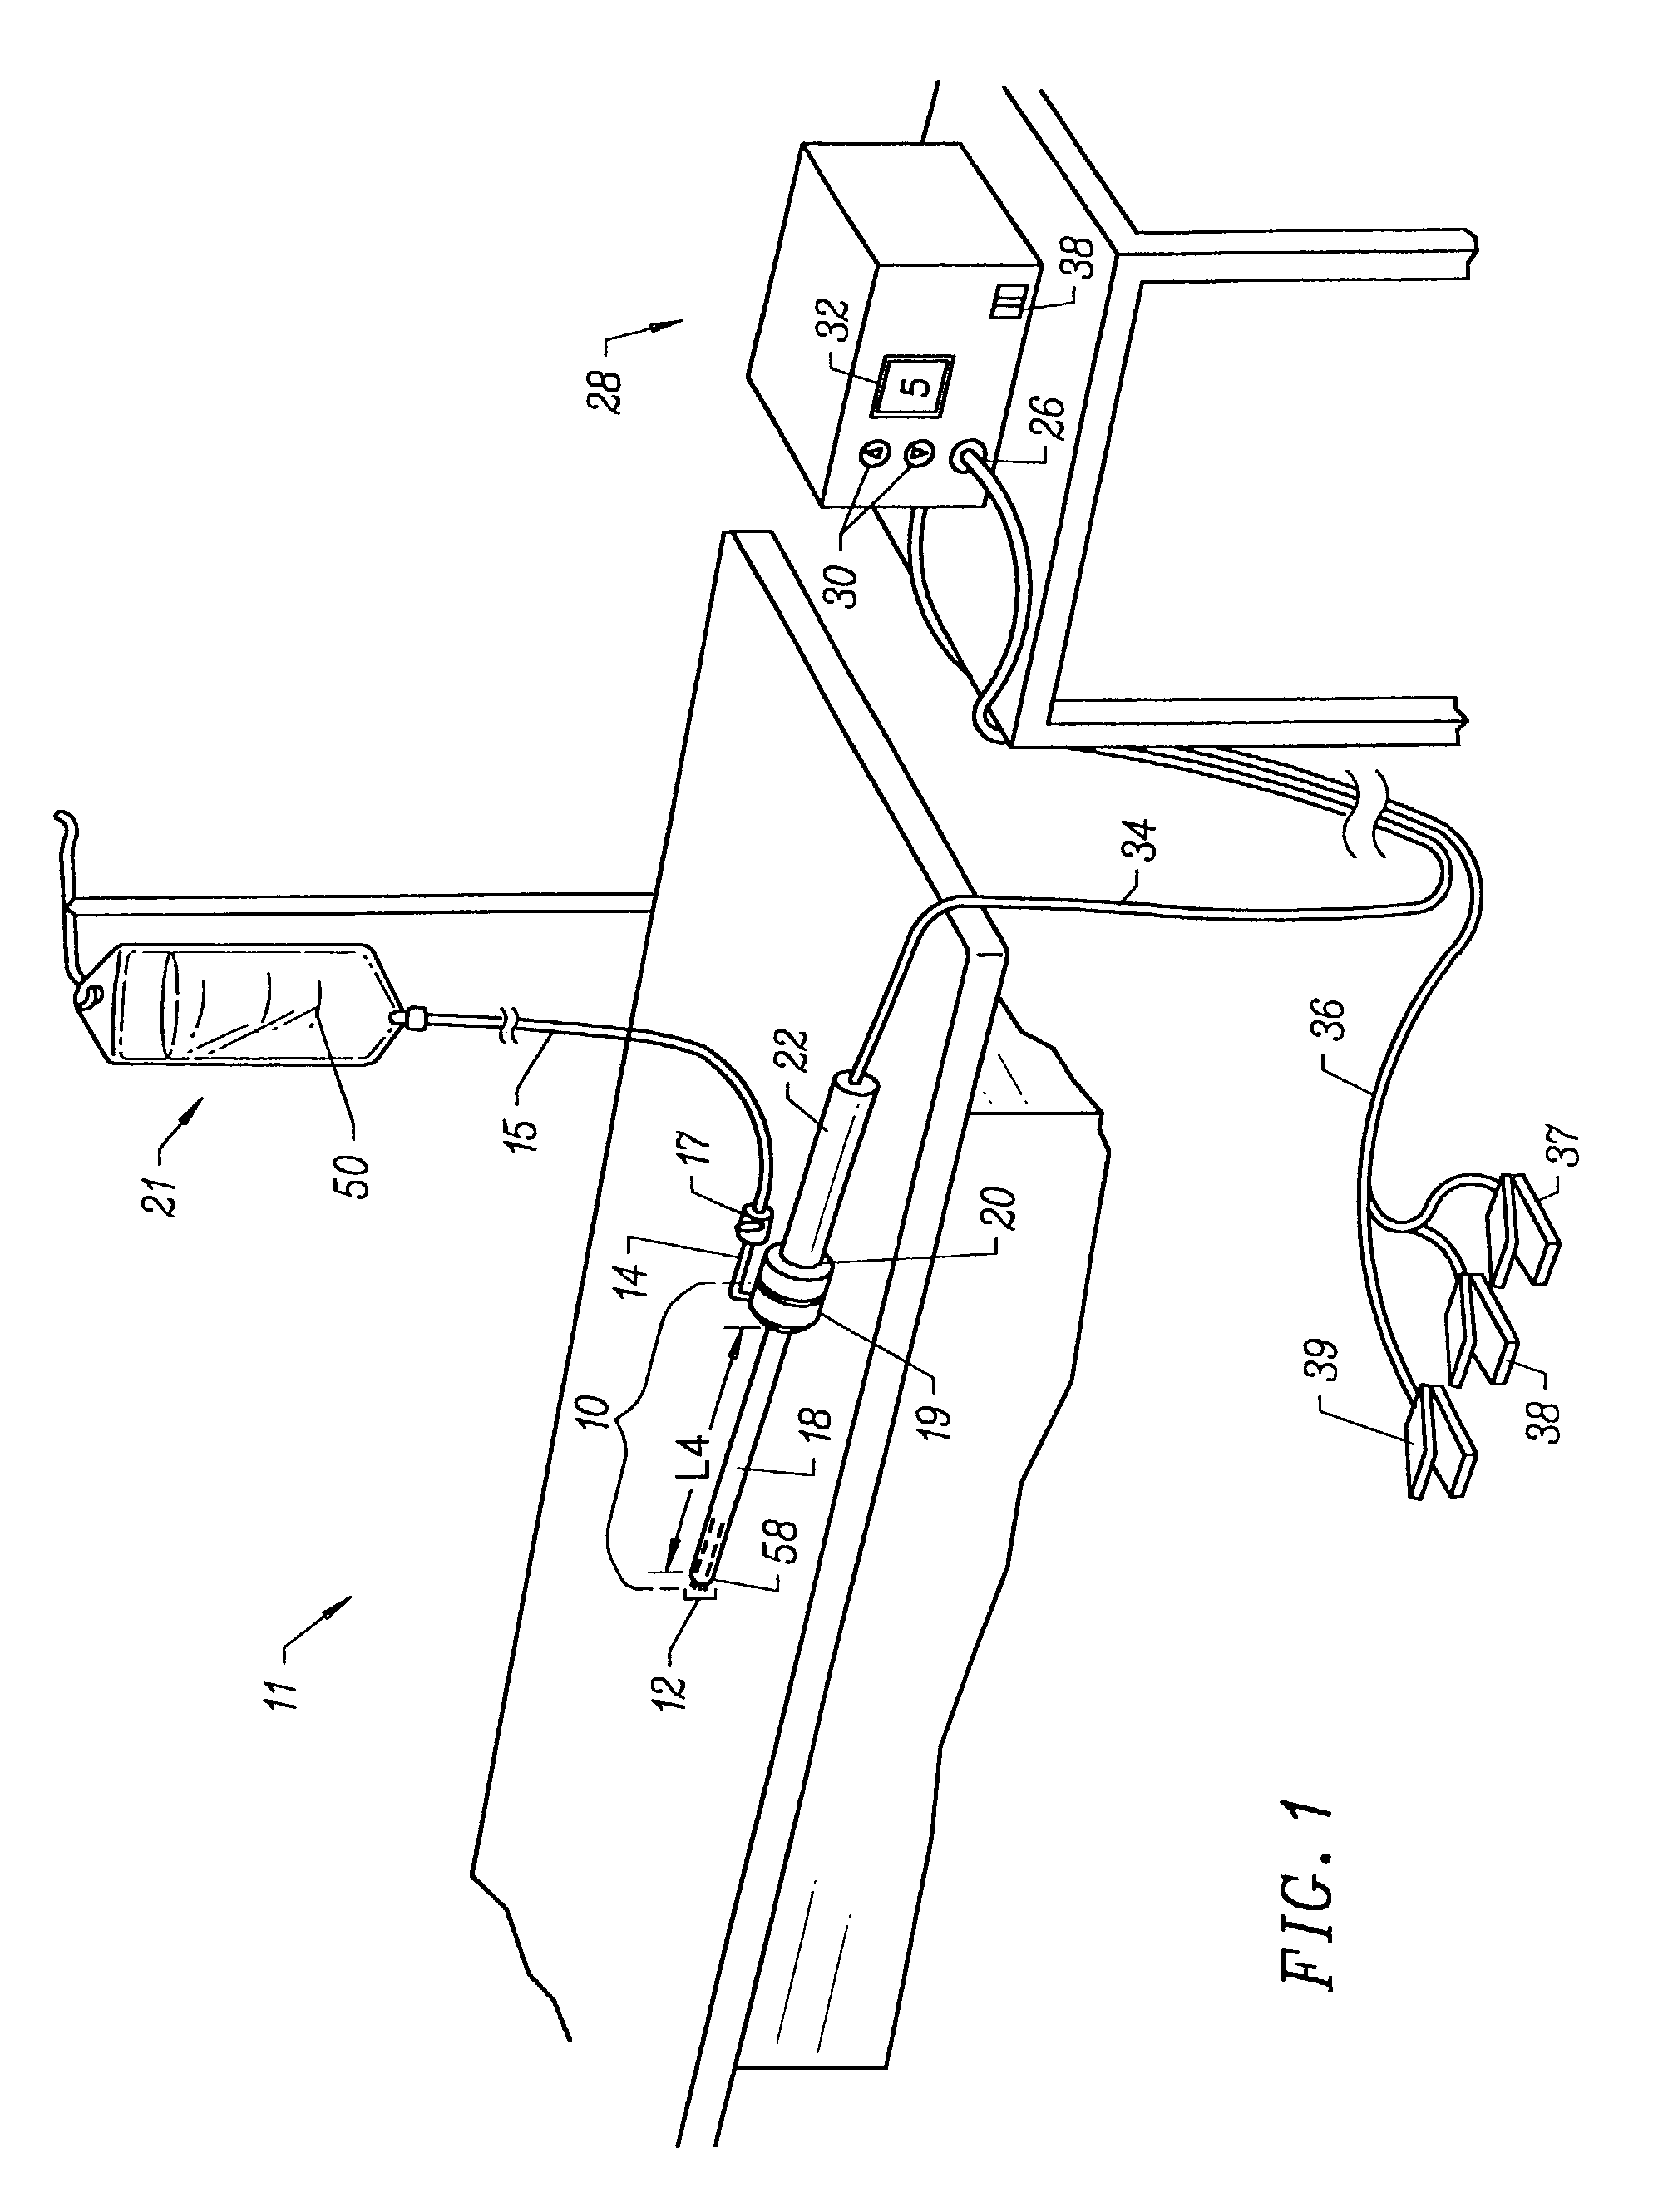 Electrosurgical systems and methods for removing and modifying tissue